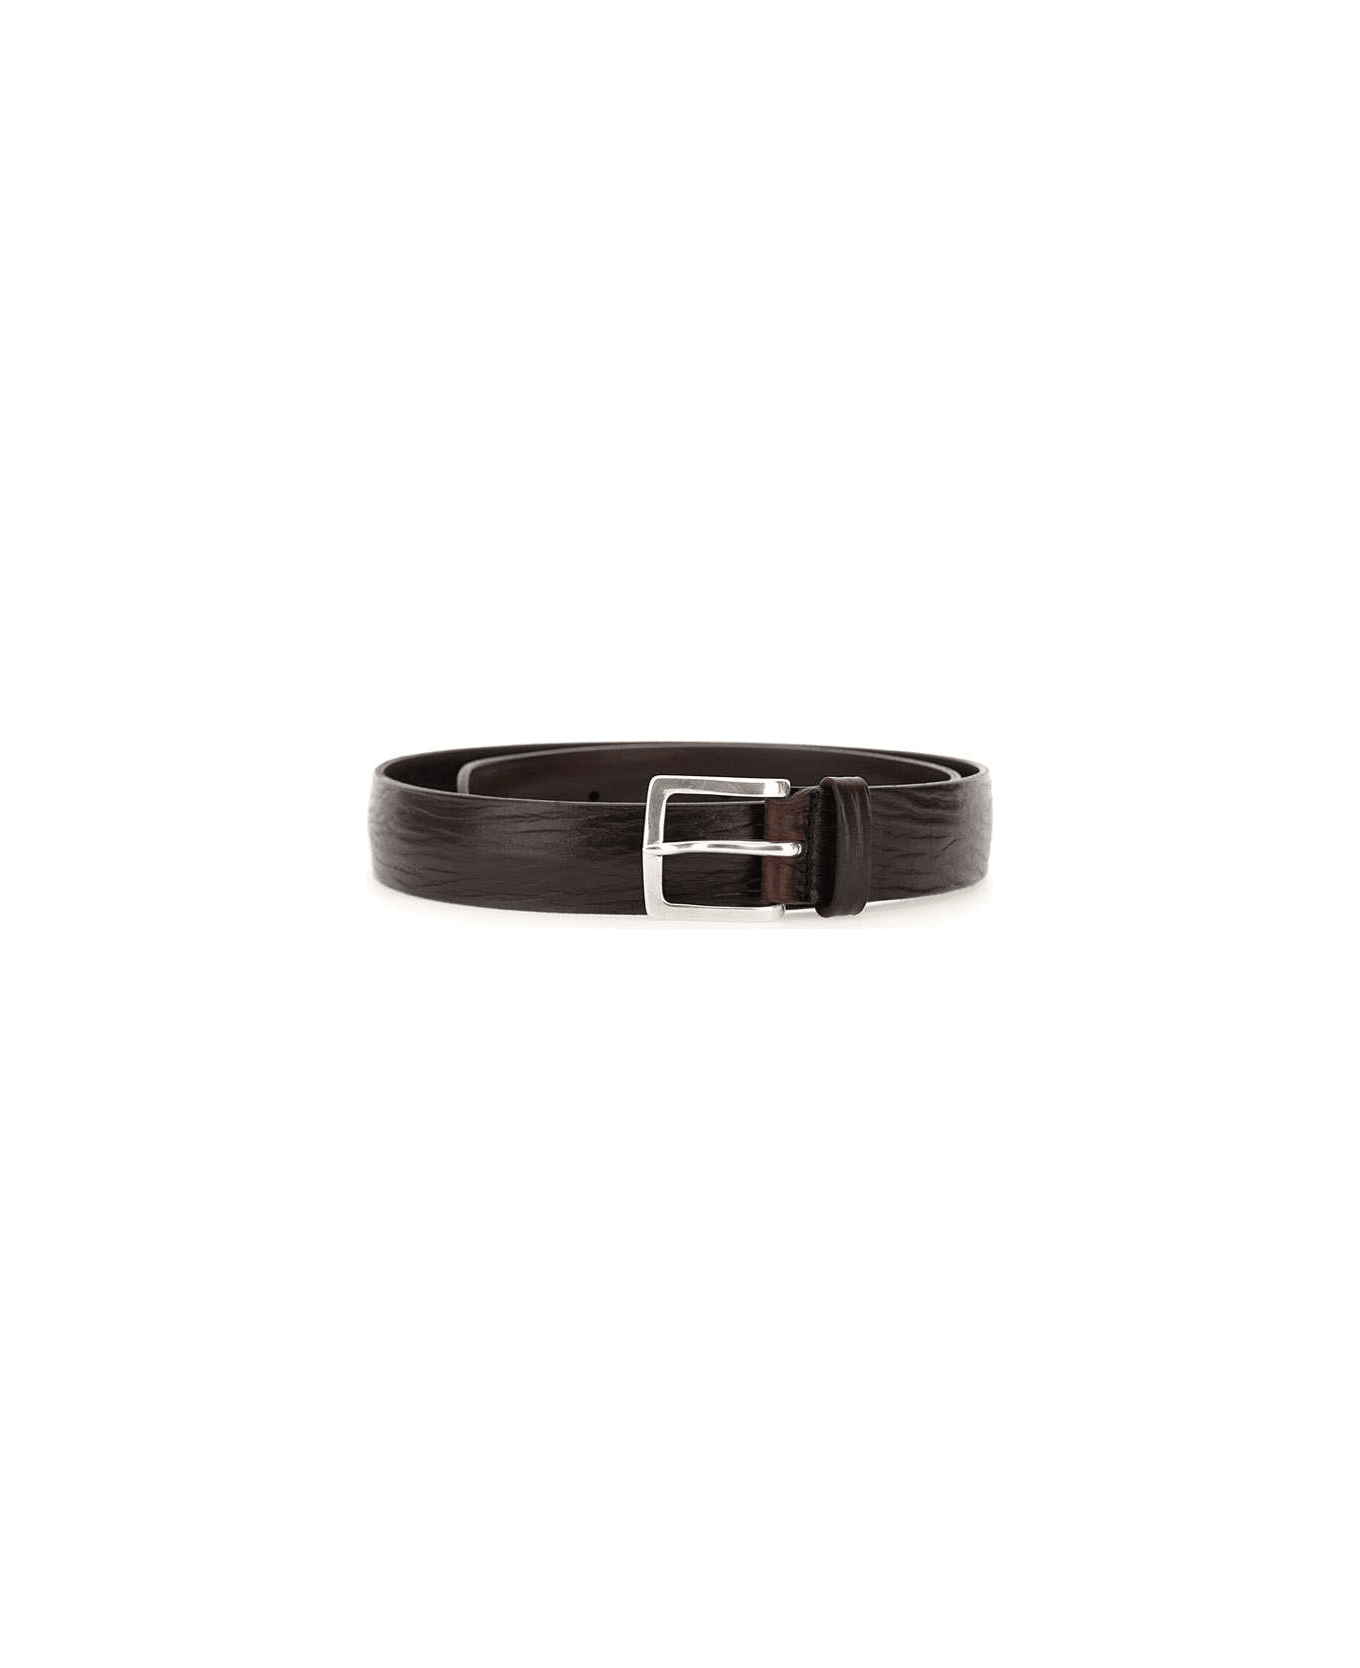 Orciani "blade" Leather Belt - BROWN ベルト